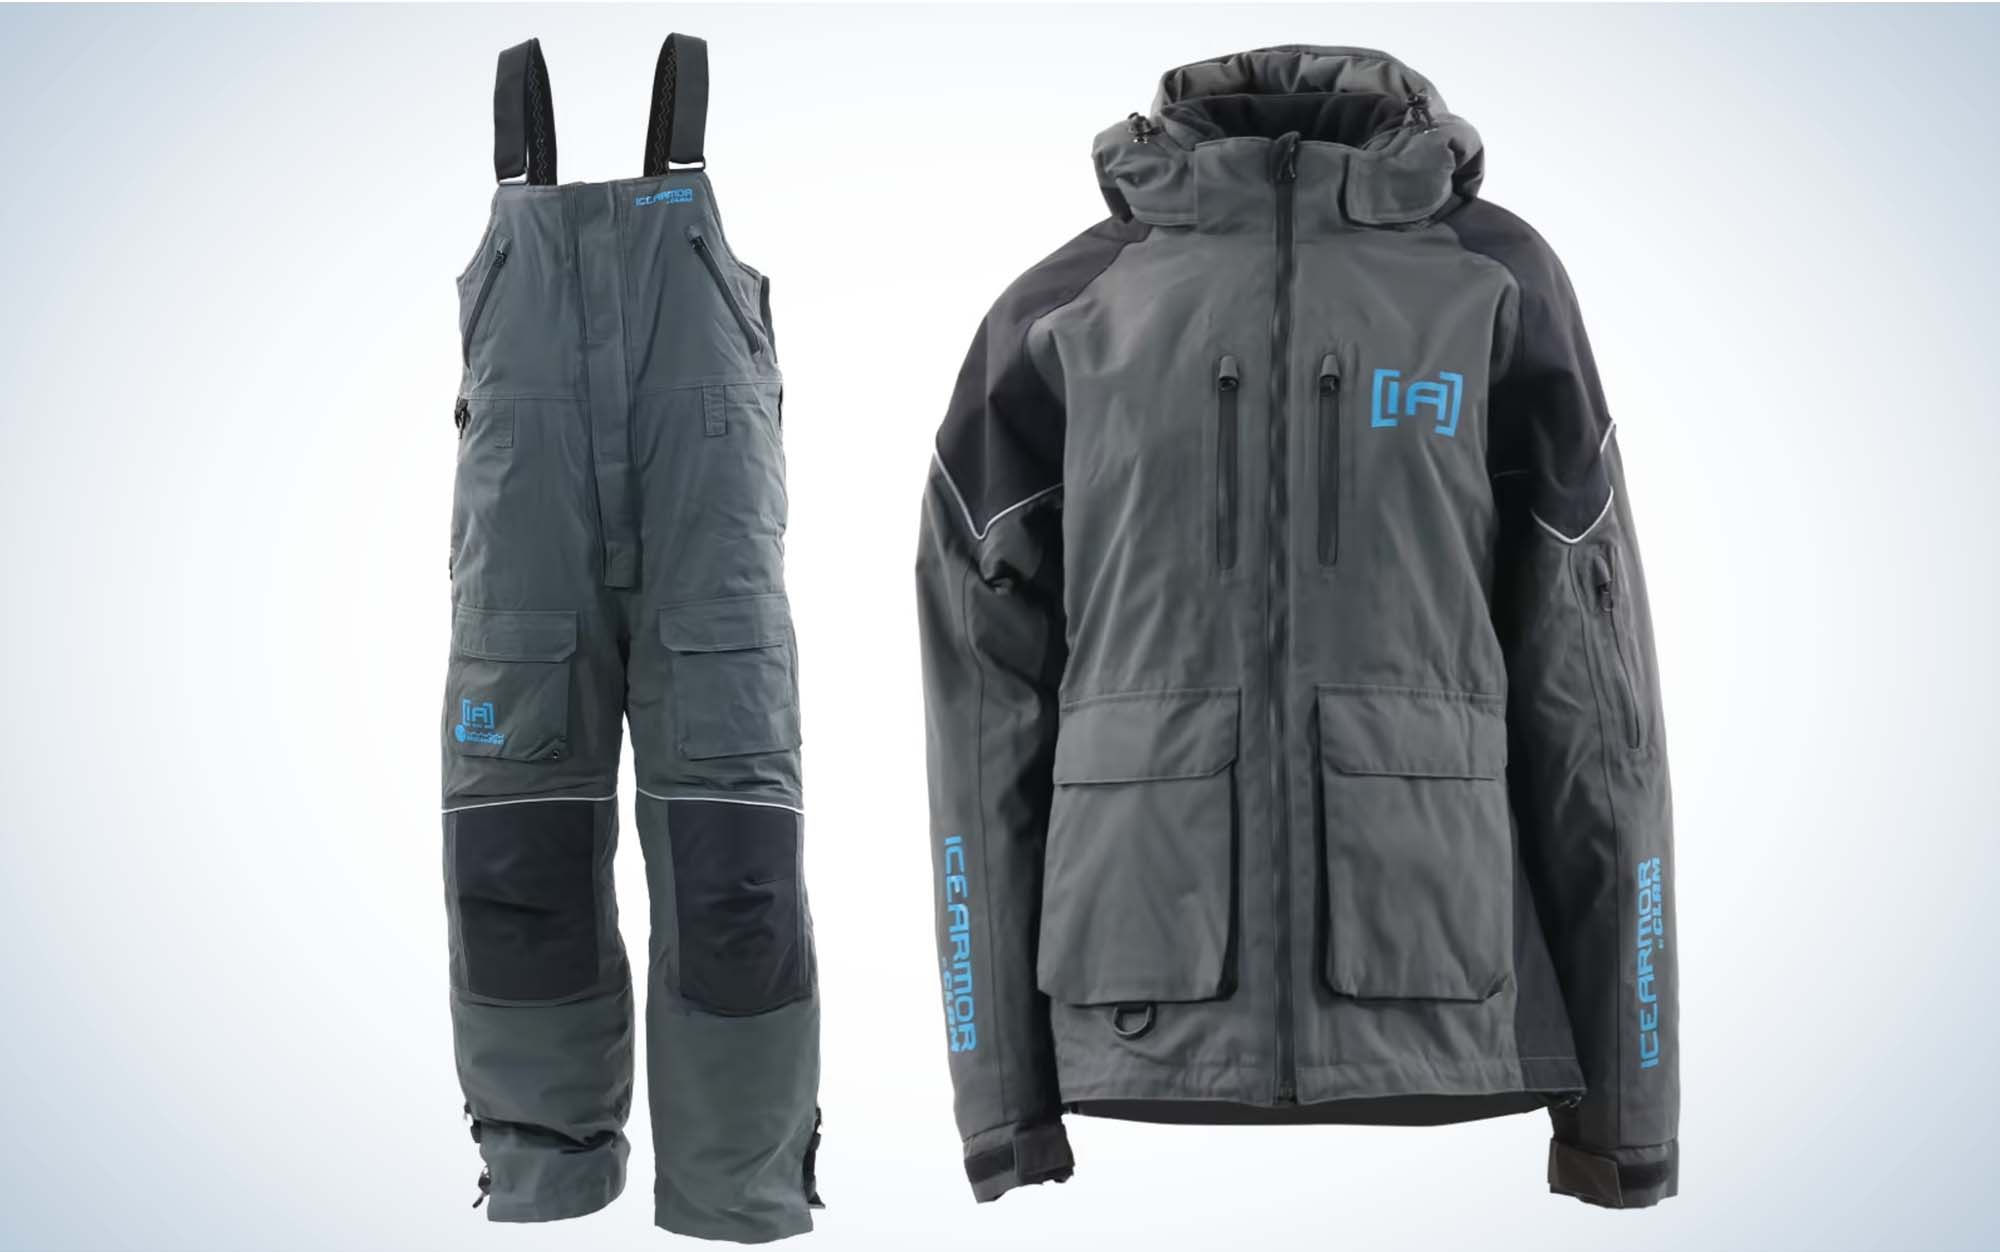 Ice Armour Weatherproof Rise Float Parka - in size 2XL 